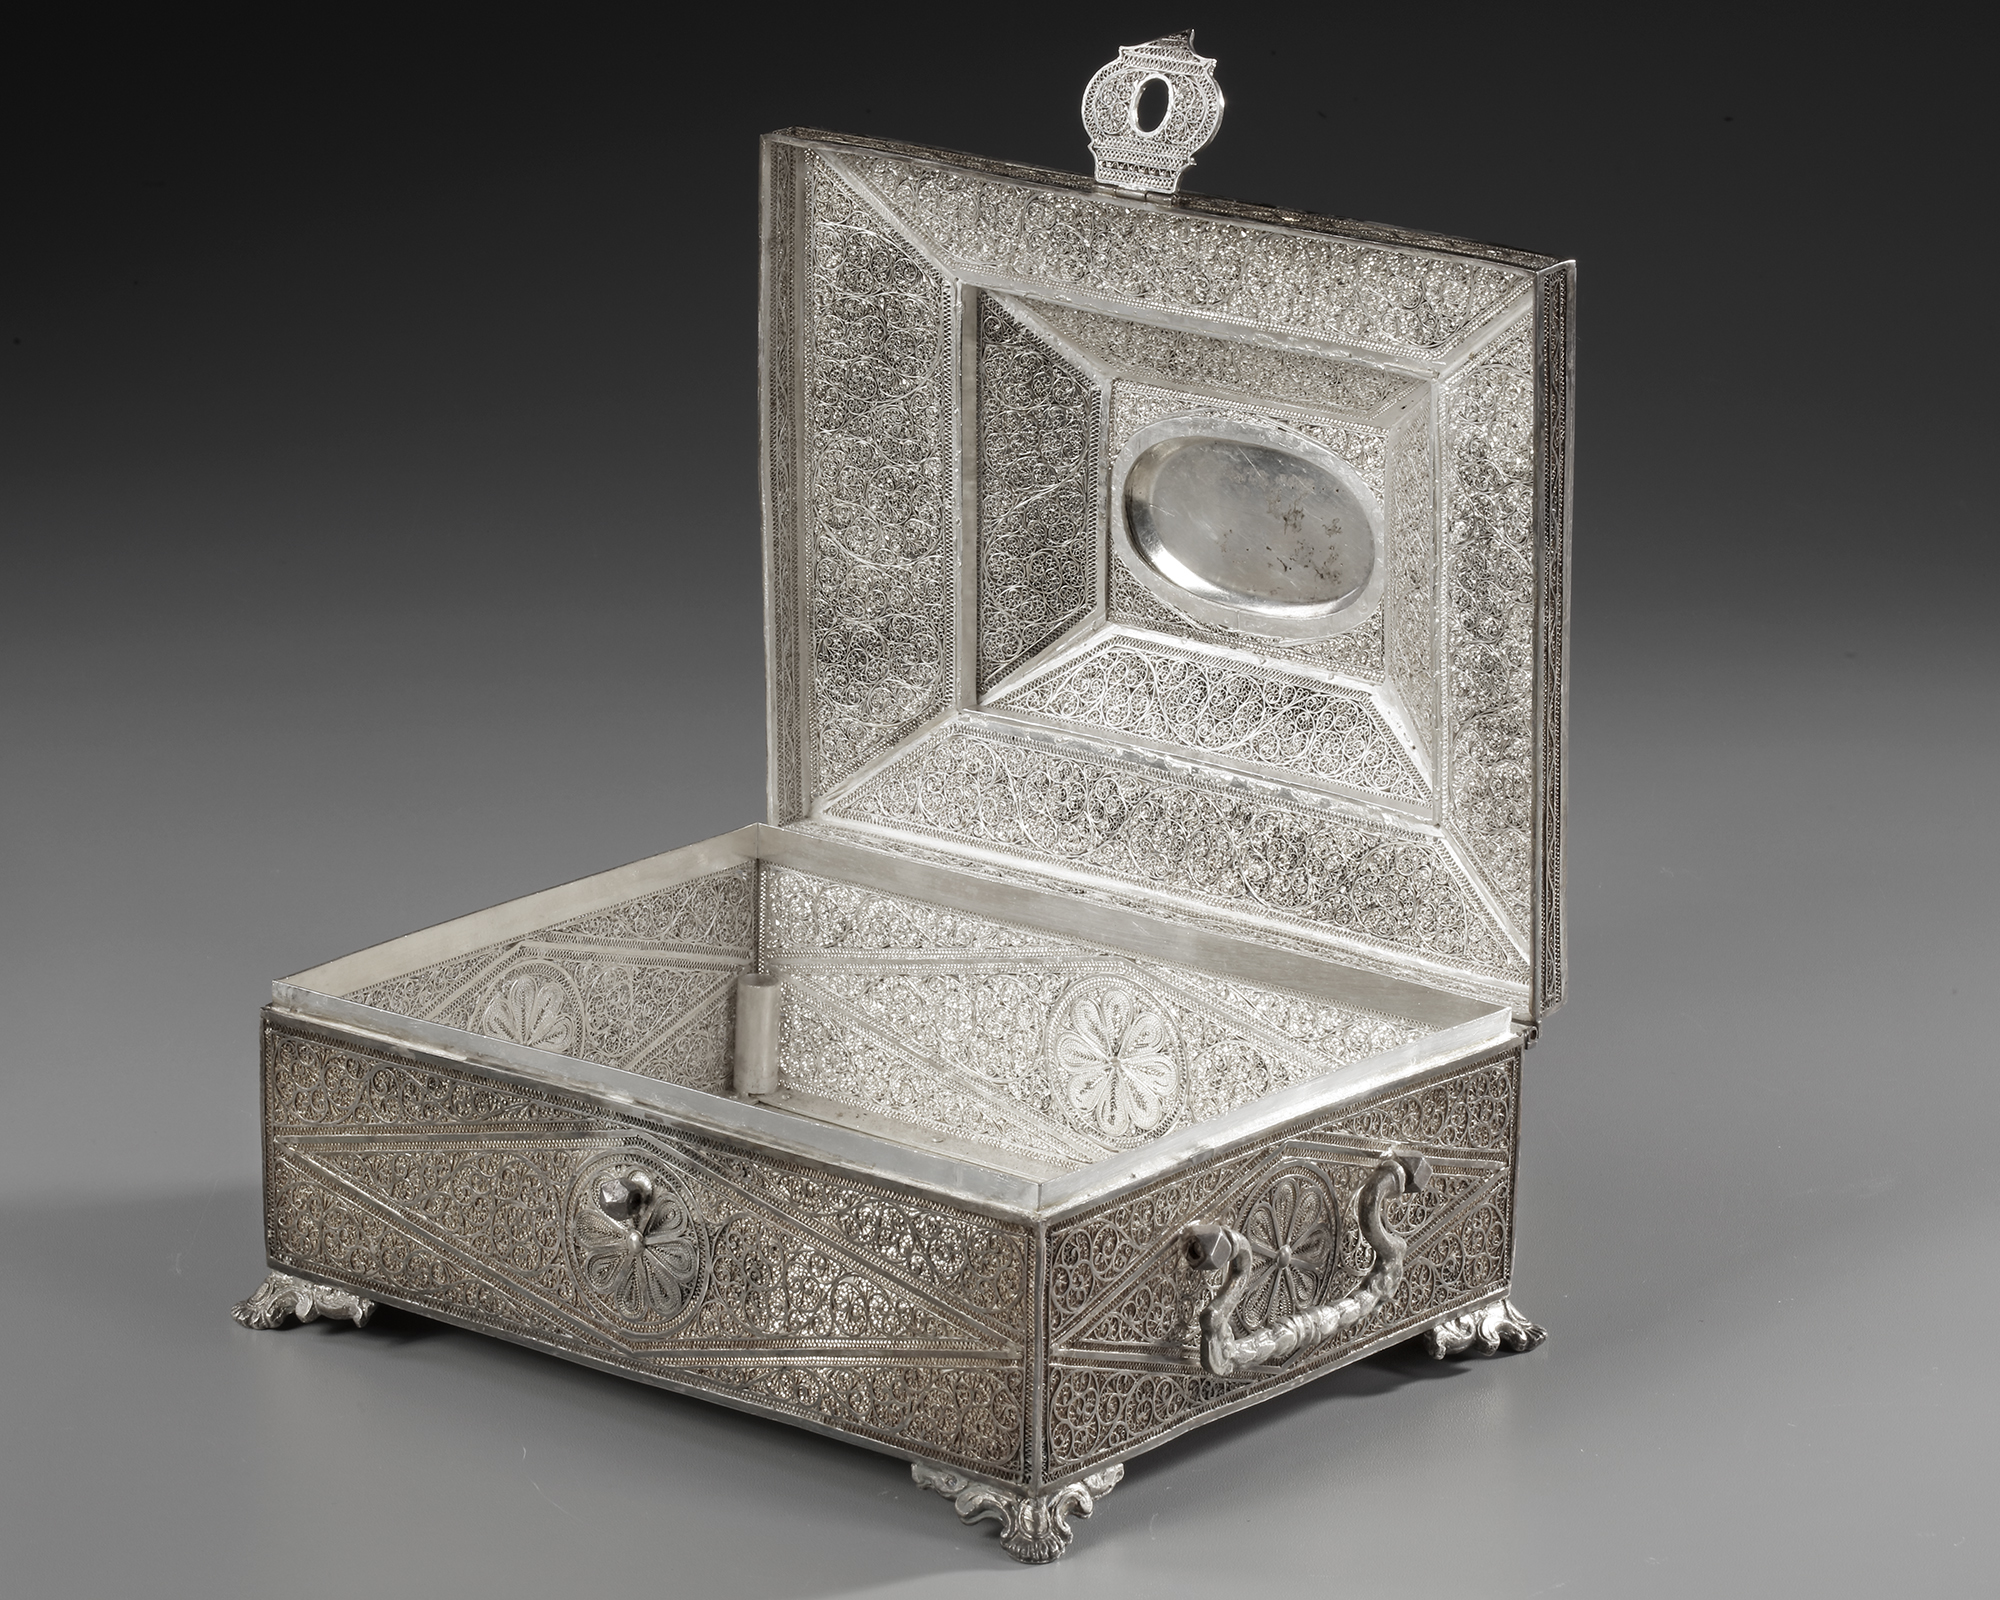 AN OTTOMAN SILVER FILIGREE CASKET, 19TH CENTURY - Image 3 of 5